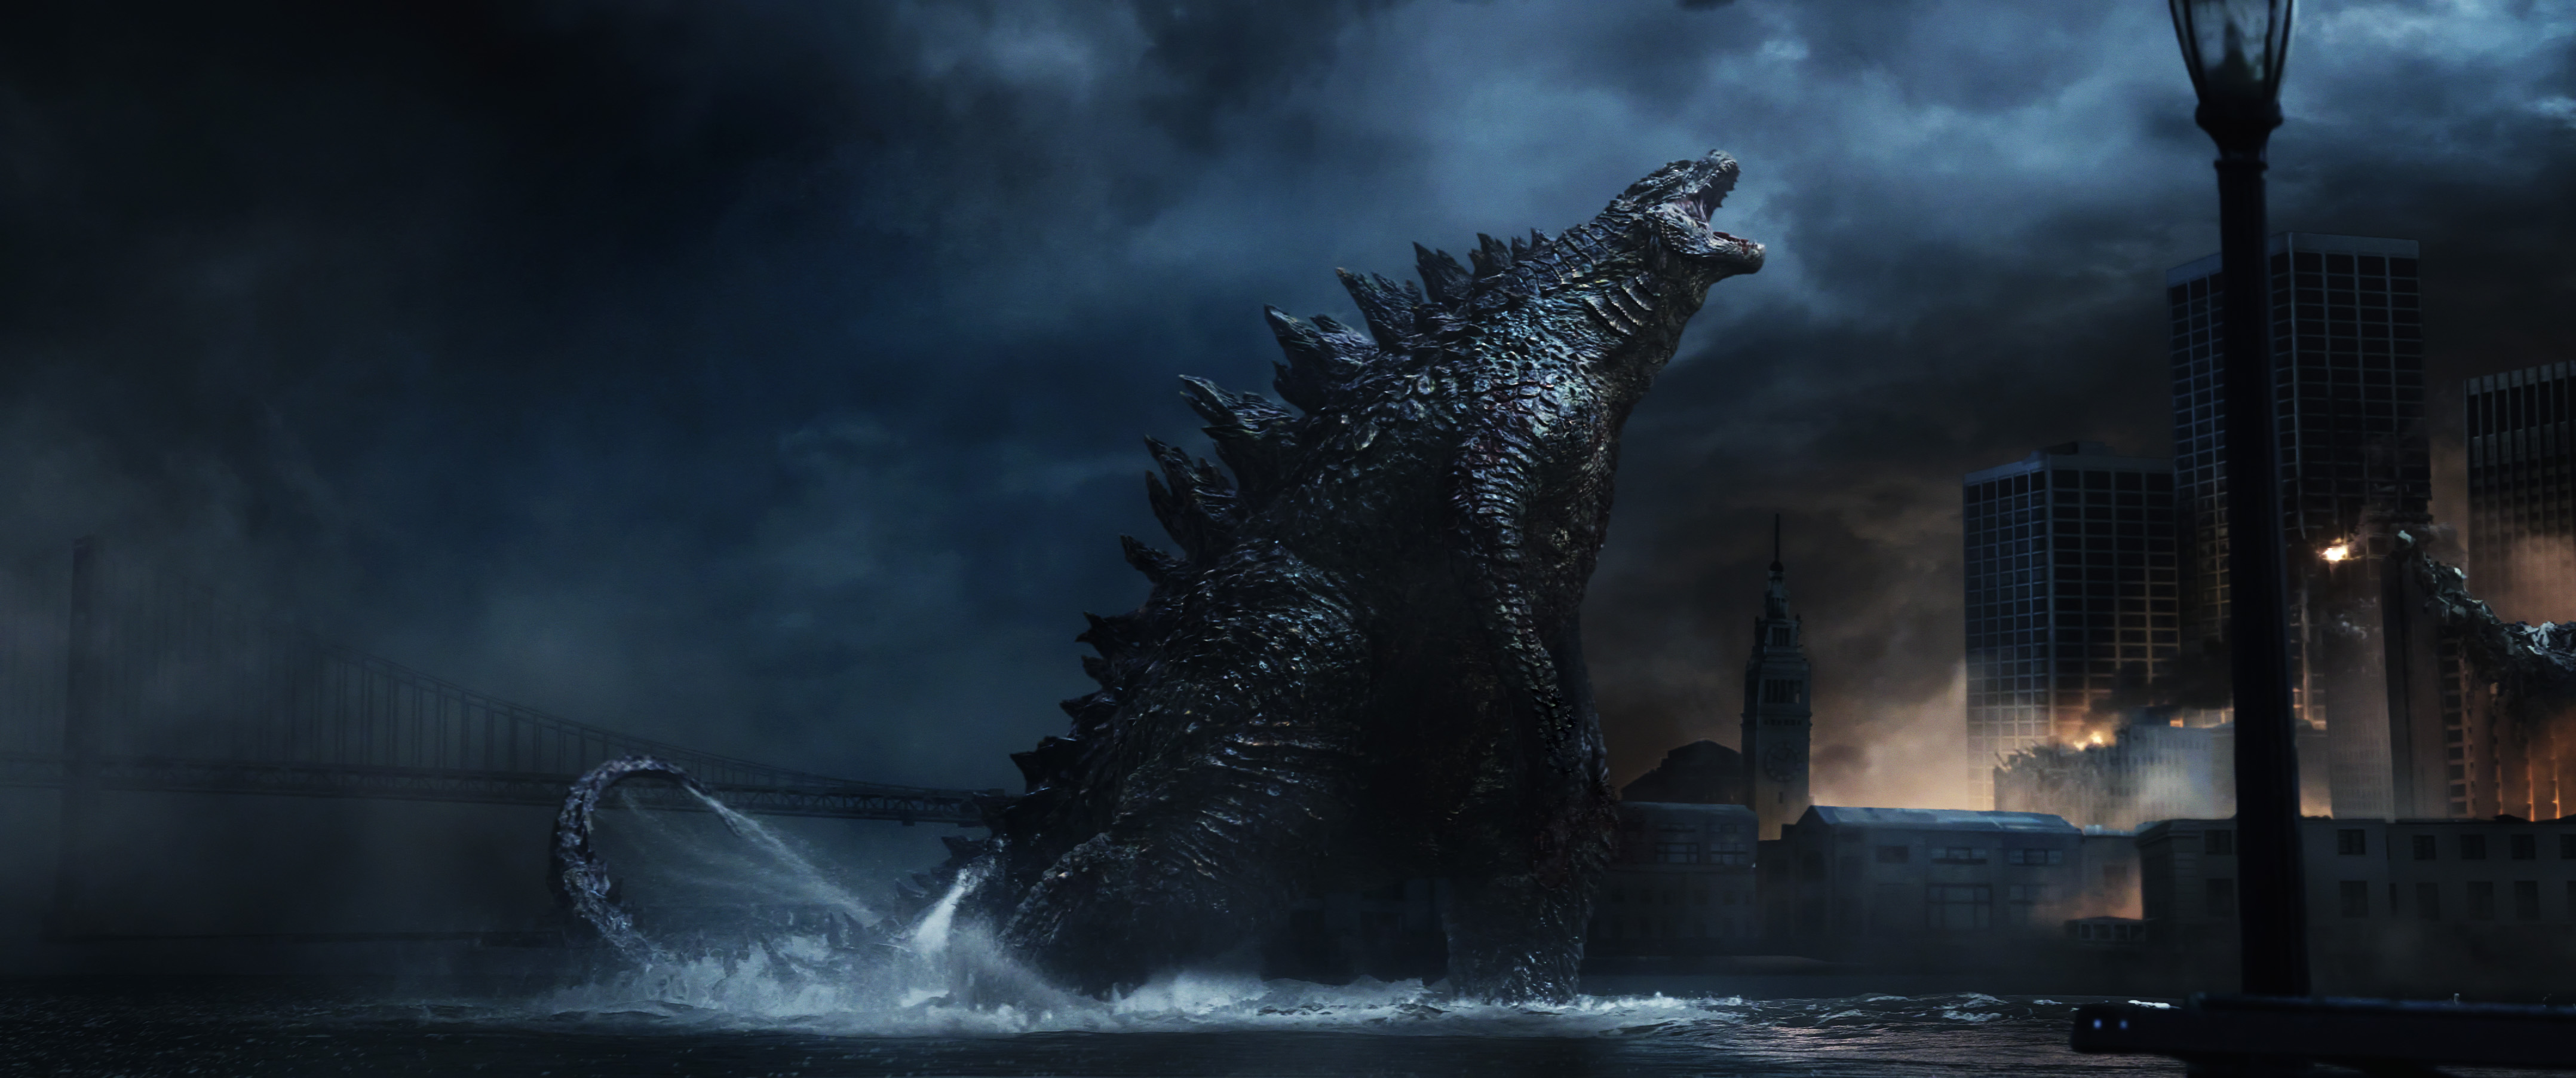 Sinopsis Oficial de Godzilla: King of the Monsters